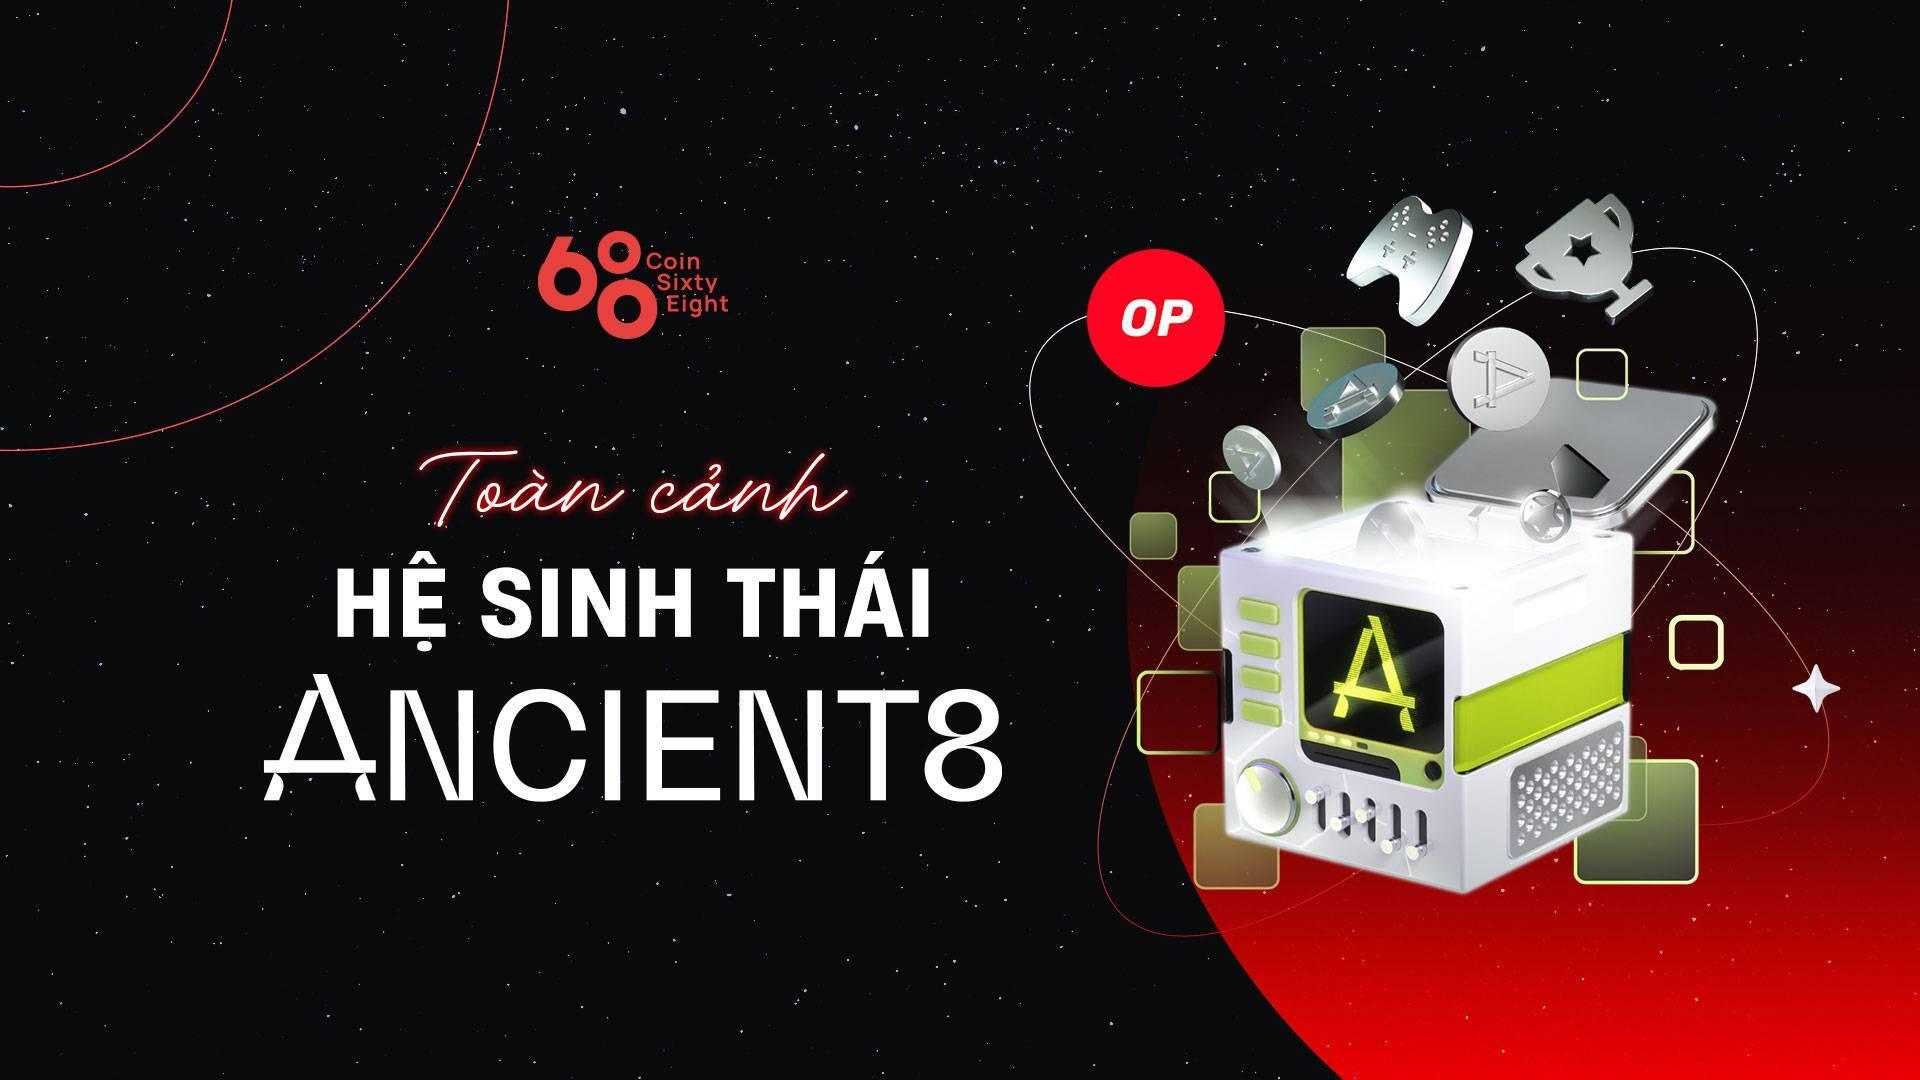 toan-canh-he-sinh-thai-ancient8